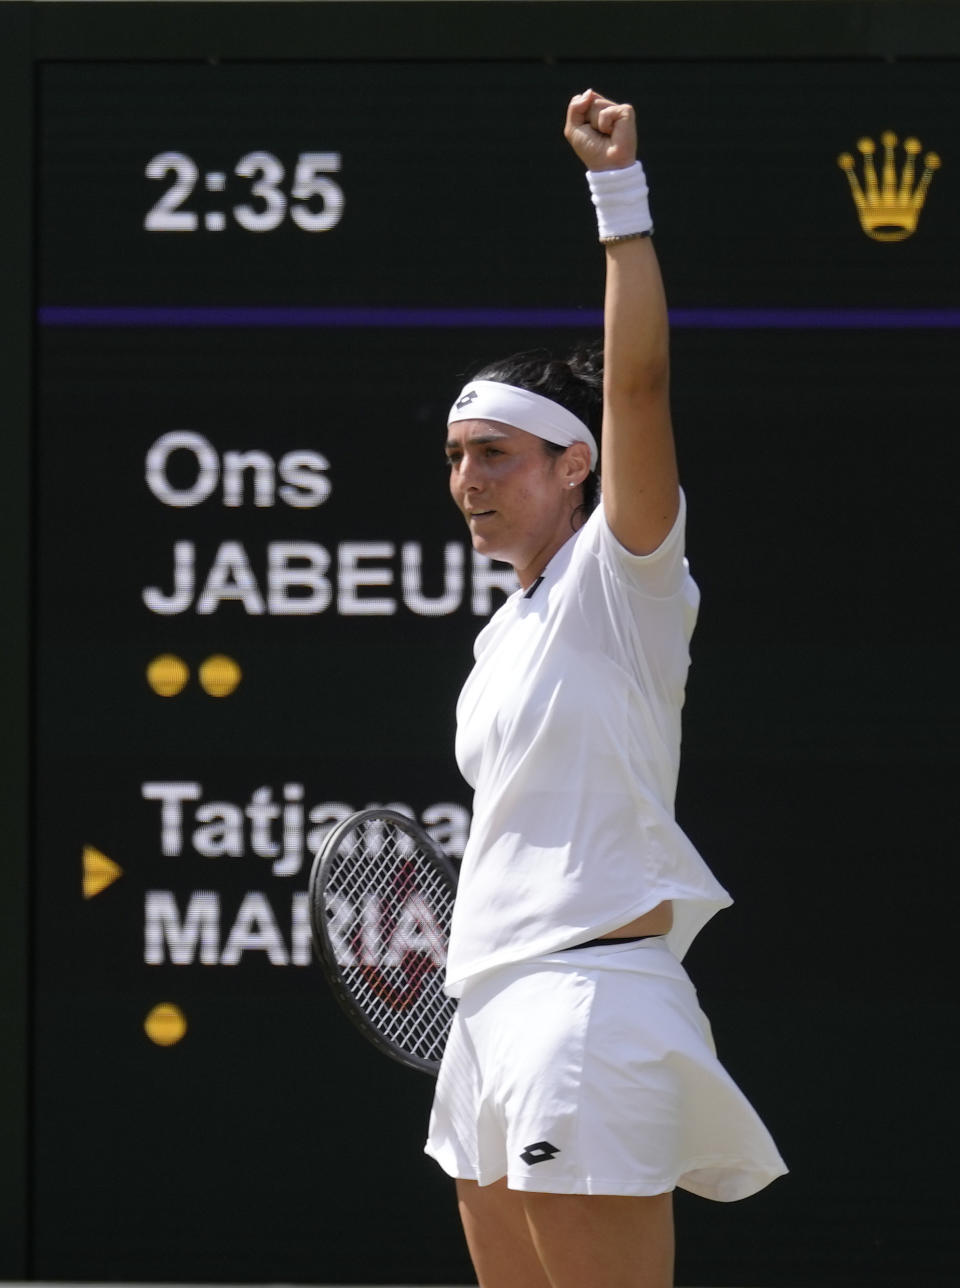 Tunisia's Ons Jabeur celebrates winning a point against Germany's Tatjana Maria in a women's singles semifinal match on day eleven of the Wimbledon tennis championships in London, Thursday, July 7, 2022. (AP Photo/Kirsty Wigglesworth)